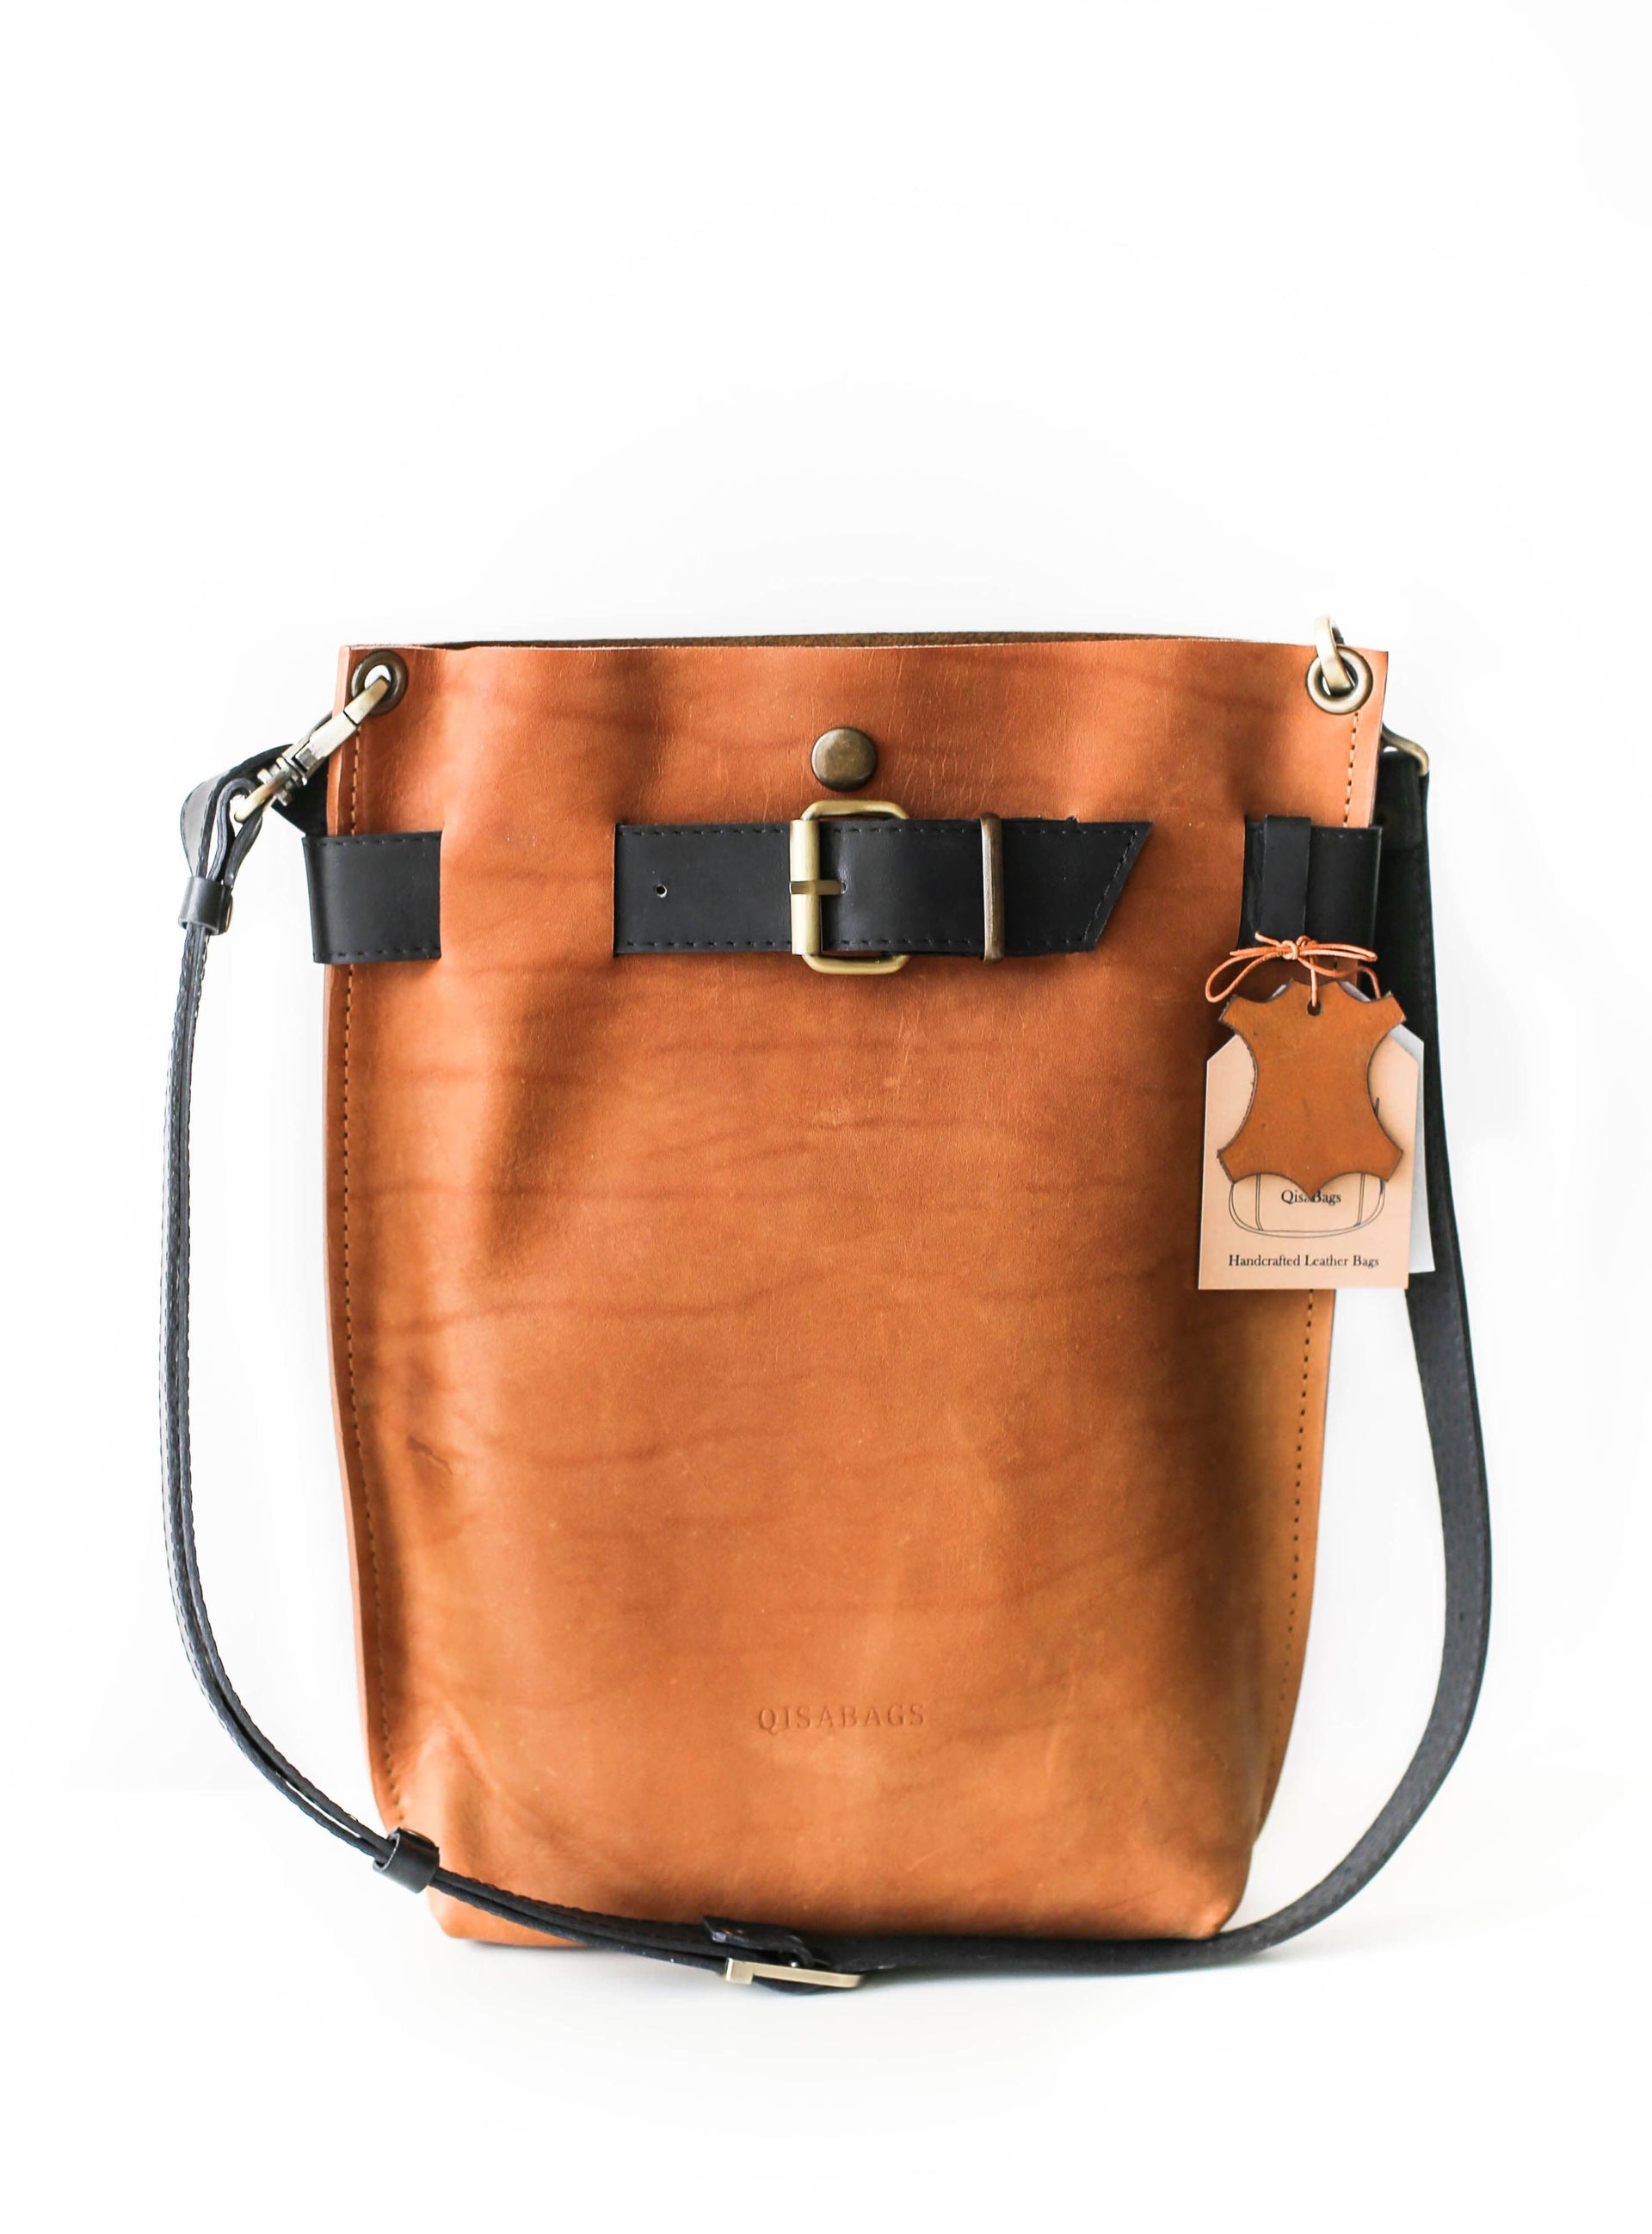 Convertible brown leather bag